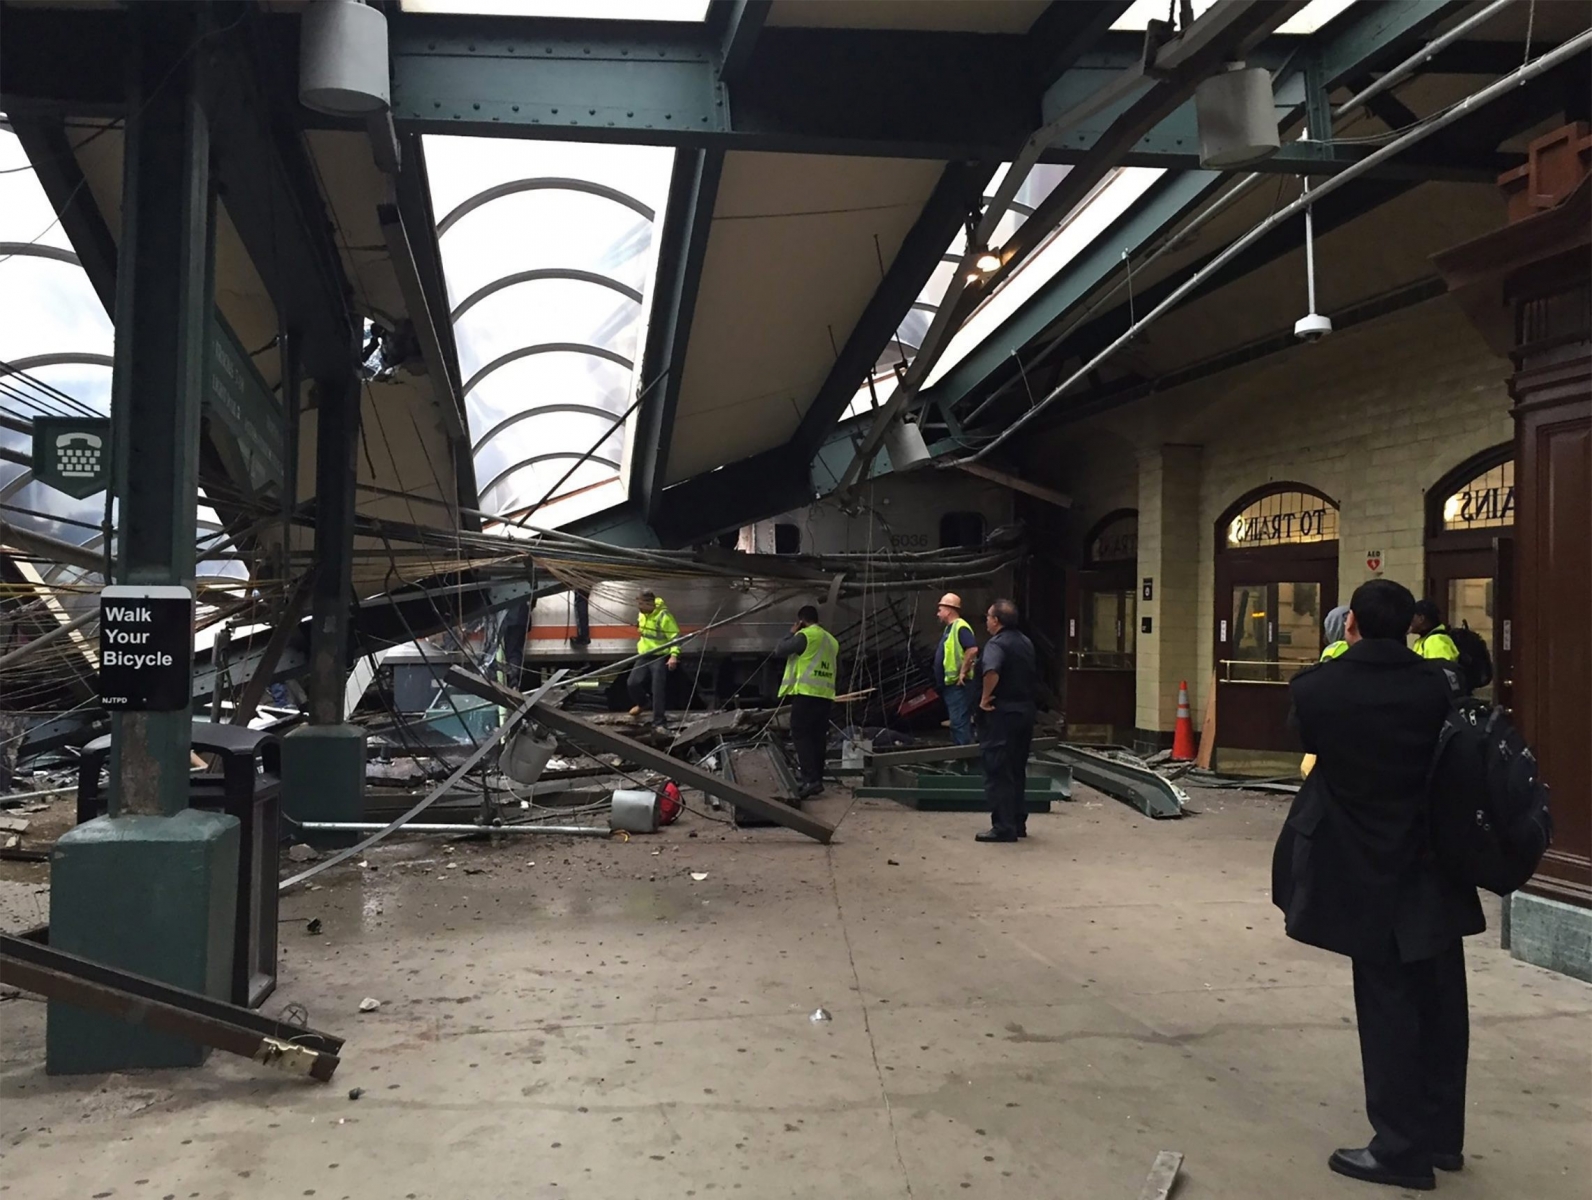 epa05562024 A picture provided by Twitter user @coreyfutterman shows workers on the platform after a NJ Transit train crashed in to the platform at the Hoboken Terminal New Jersey, USA, 29 September 2016. Reports stated that at least 3 people were killed and over 100 injured in the accident.  EPA/@coreyfutterman  HANDOUT EDITORIAL USE ONLY/NO SALES USA TRAIN CRASH